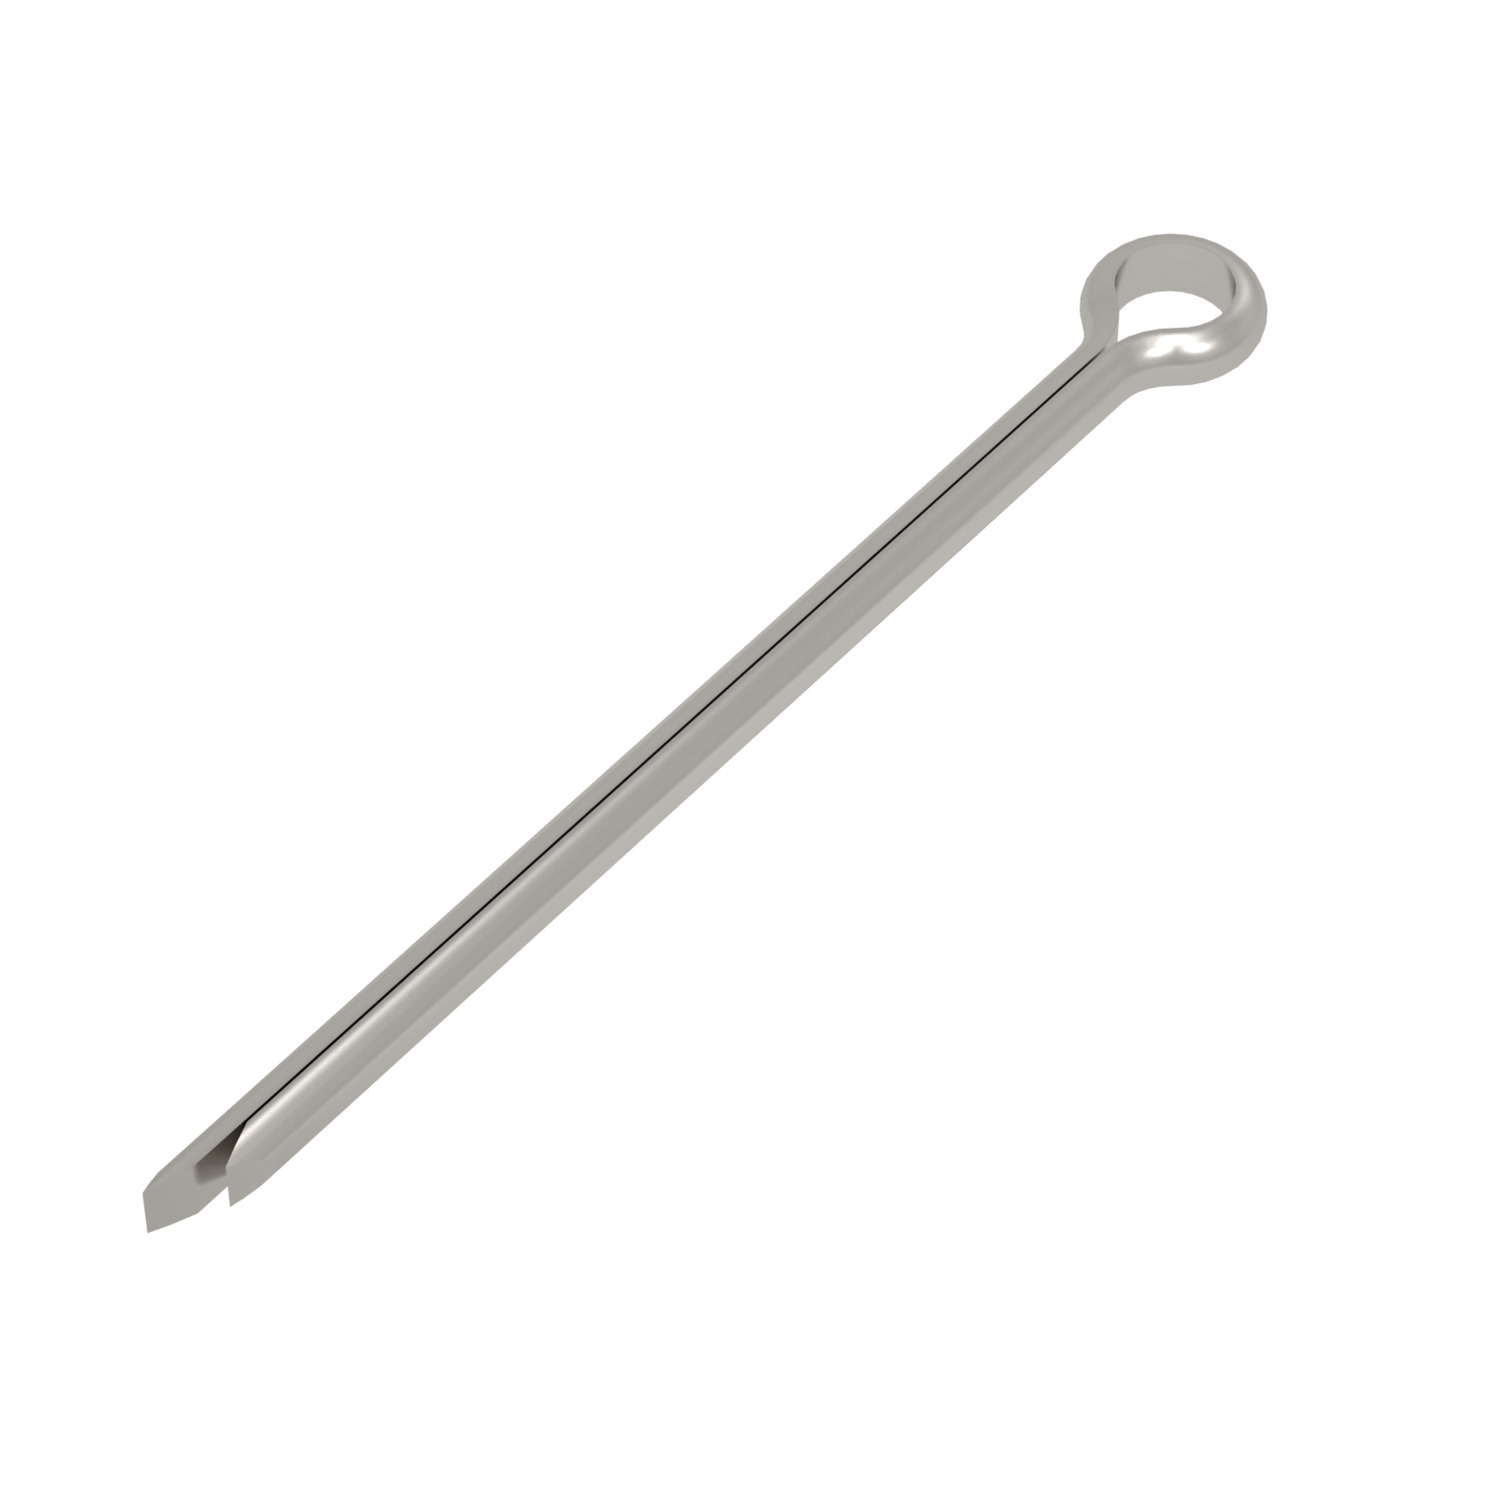 Stainless Cotter Pins Stainless steel (A2) cotter pins. Stainless steel clevis pins and washers are also available for a corrosion resistant assembly.